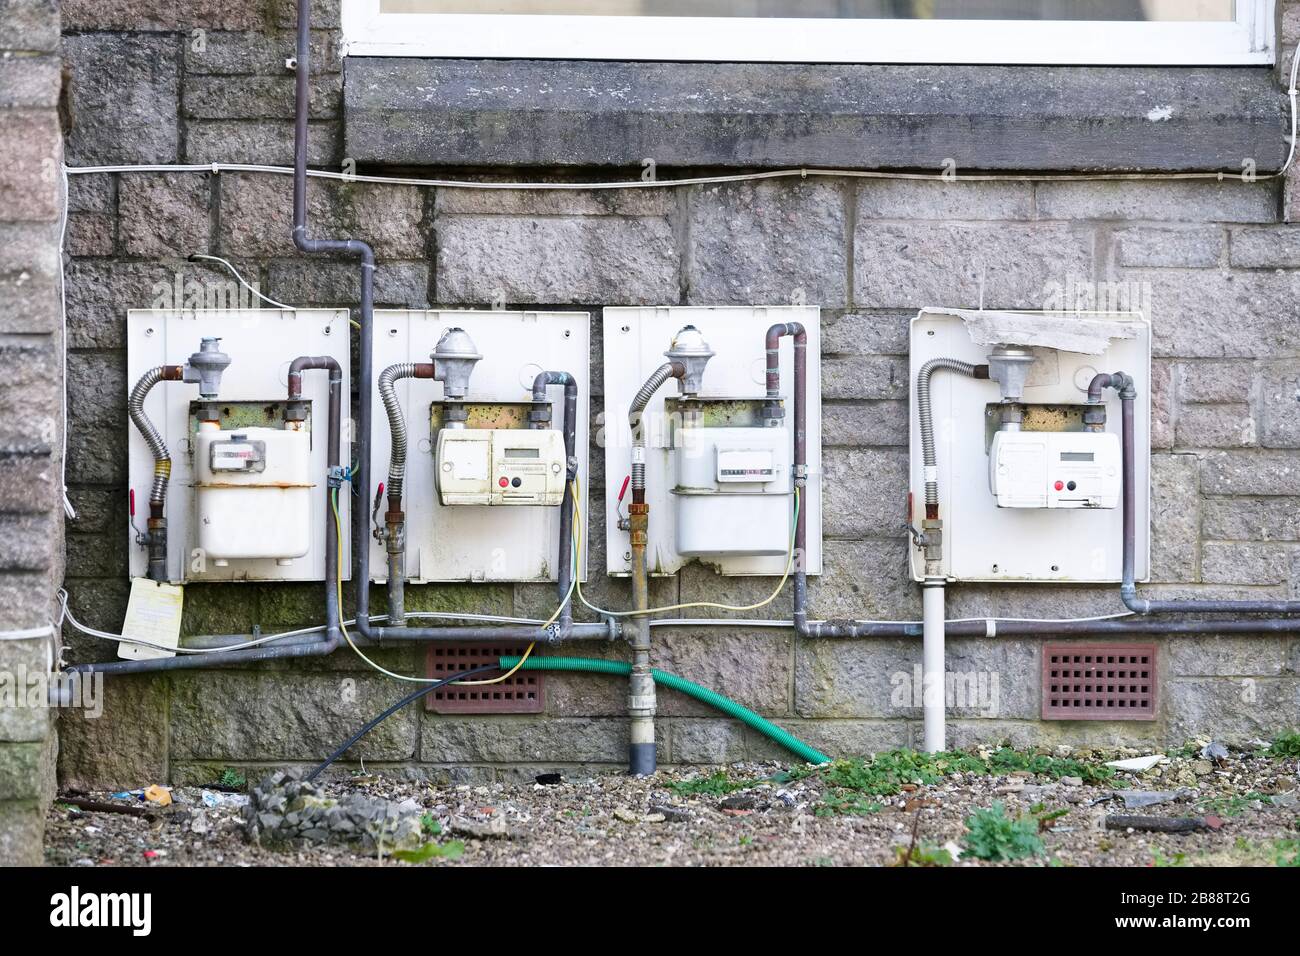 Gas meter box housing outside external to council house a row Stock Photo